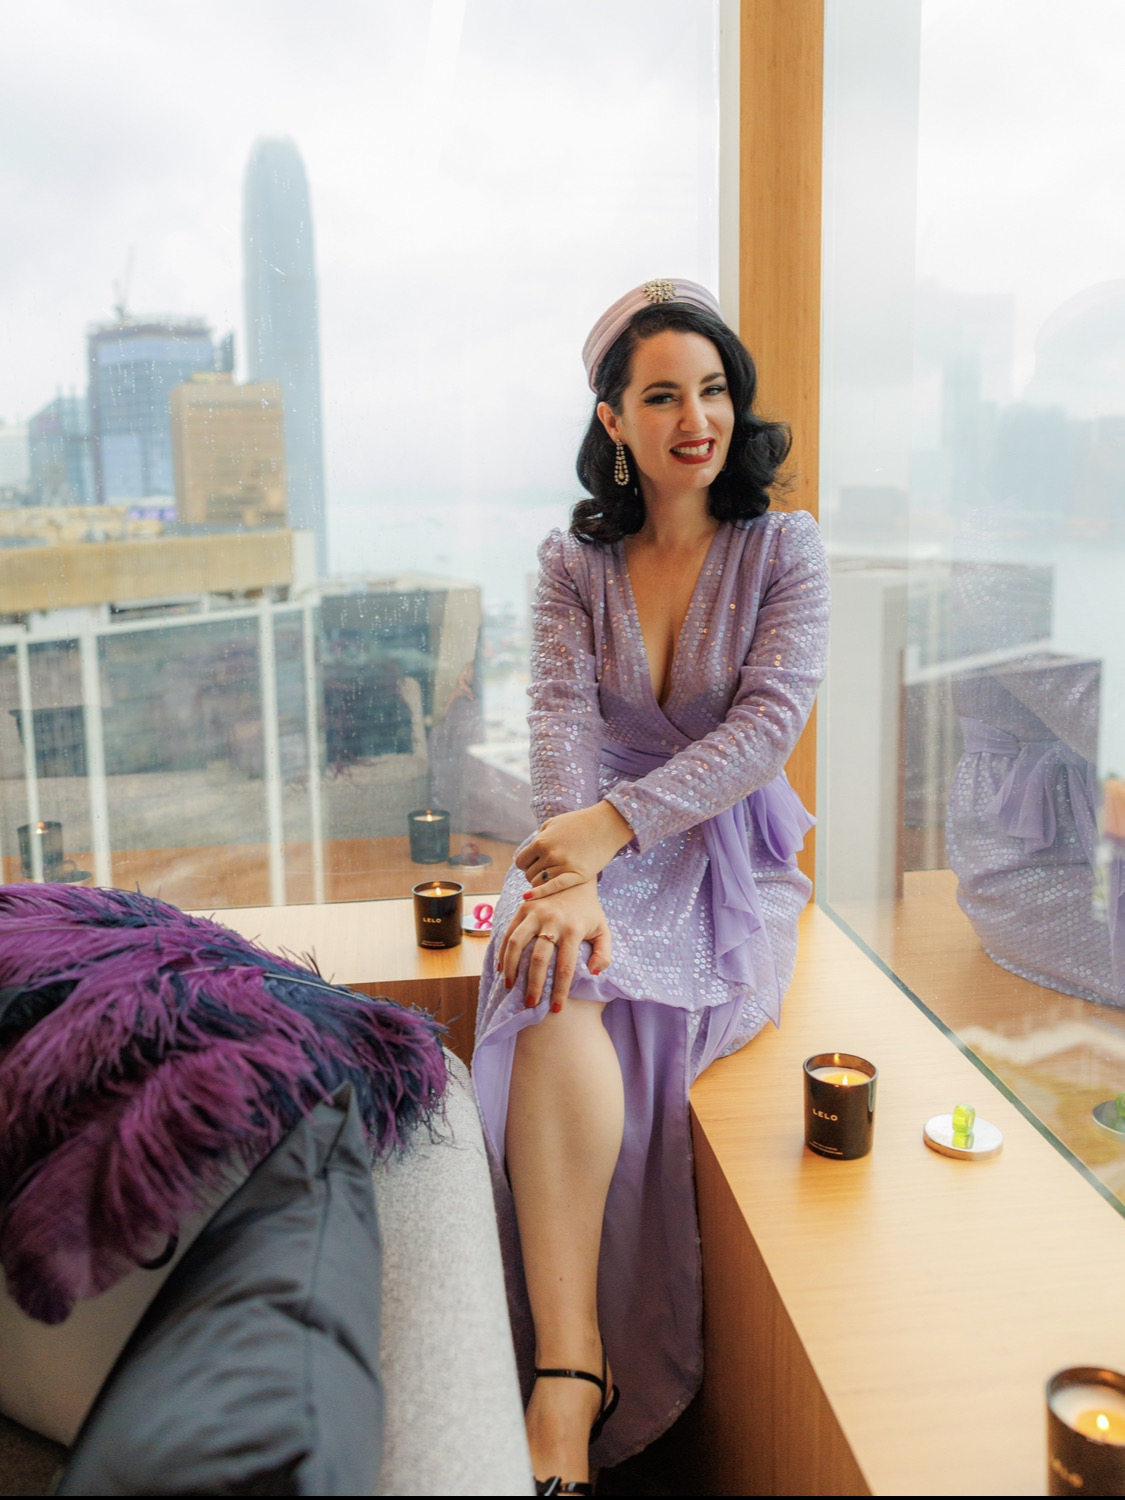 Hong Kong sexologist Mary Foxworth recommends that people schedule time for intimacy and pleasure. Photo: Mary Foxworth